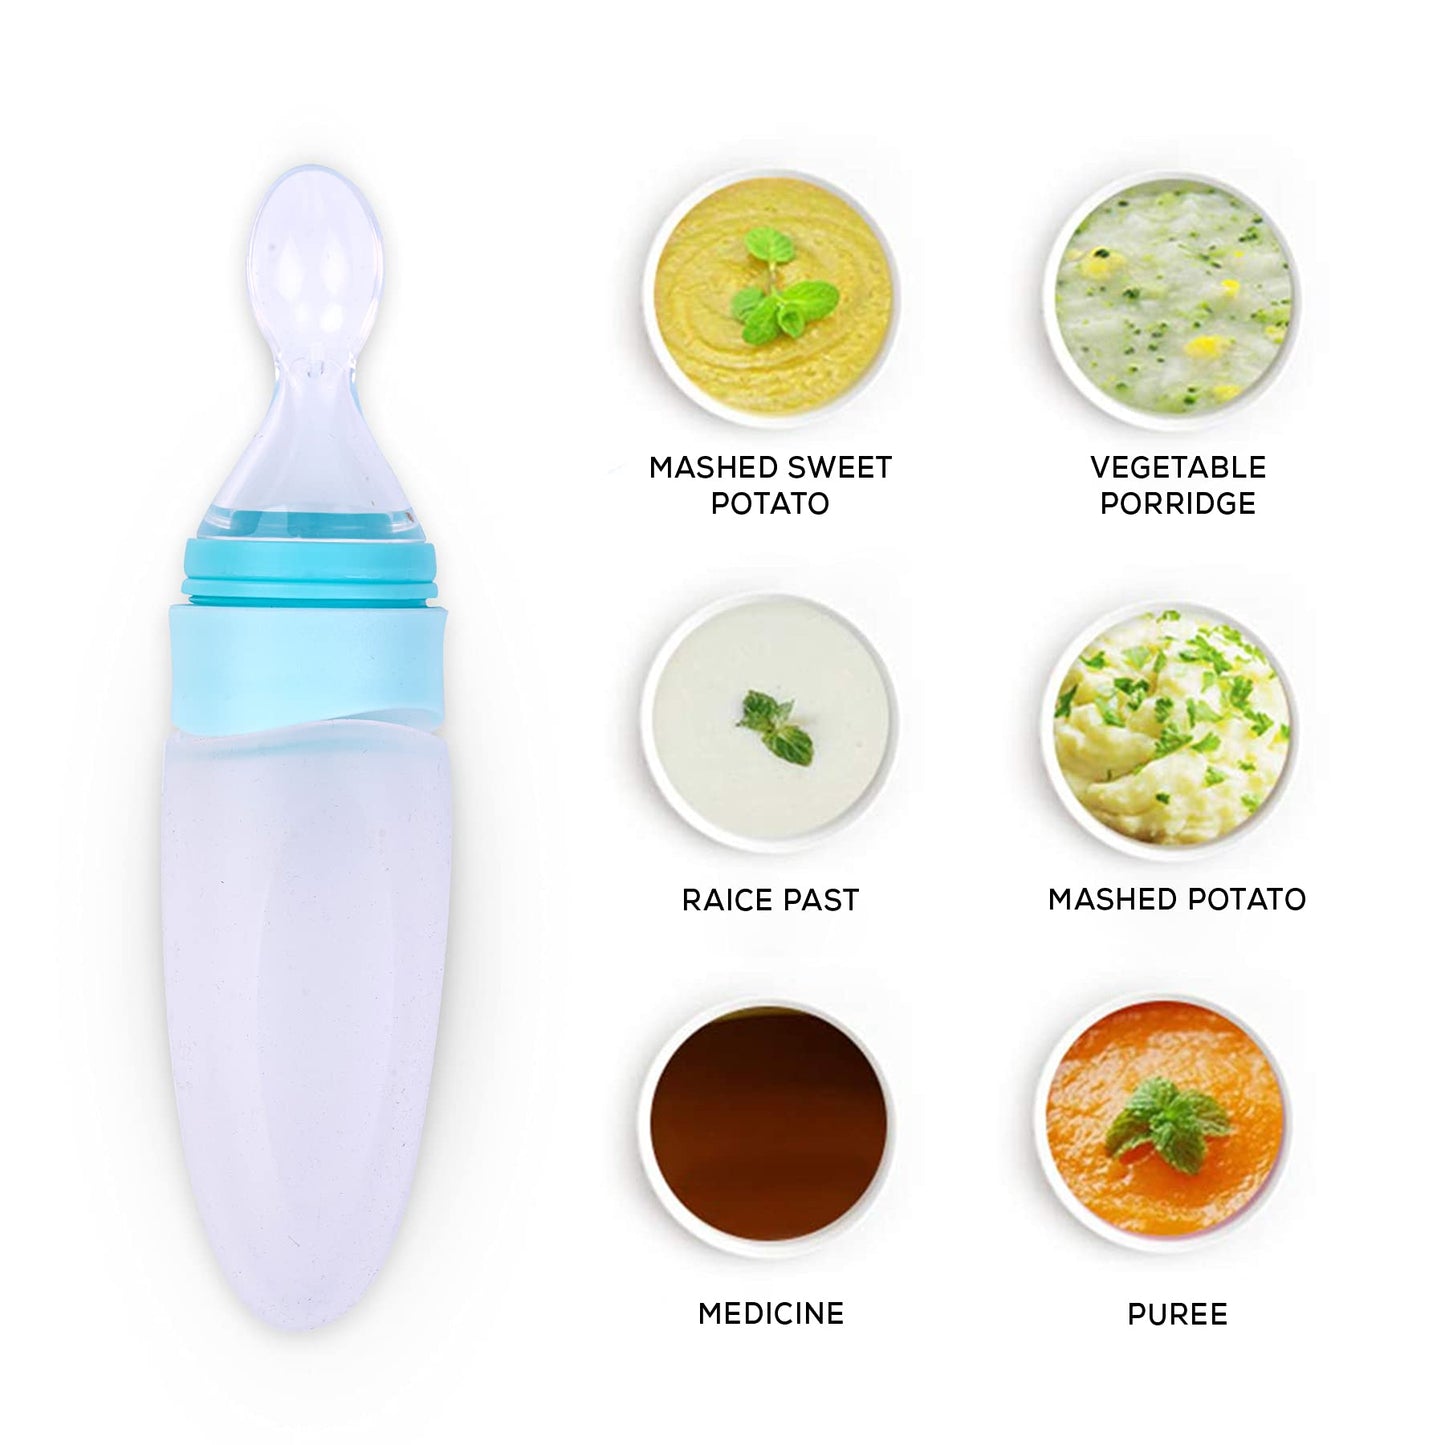 Baybee Infant Silicone Food Feeder, Anti-Colic & BPA Free Squeeze Feeder Bottle with Spoon for Semi-Solid Food for Infants